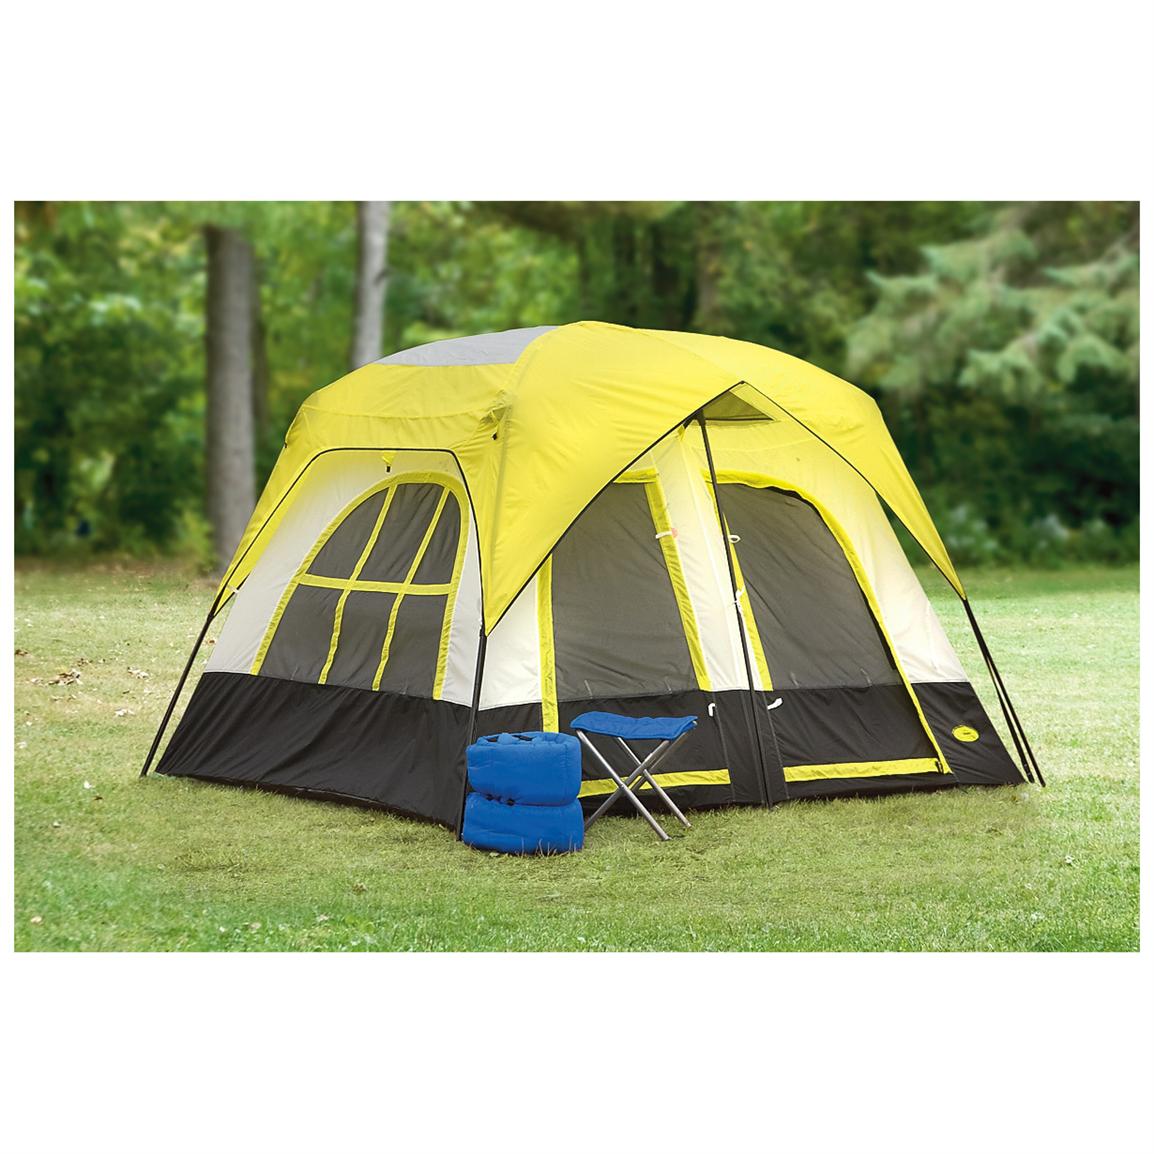 Texsport® Lazy River 2 room Cabin Tent, Gray / Black / Yellow 232440, Cabin Tents at